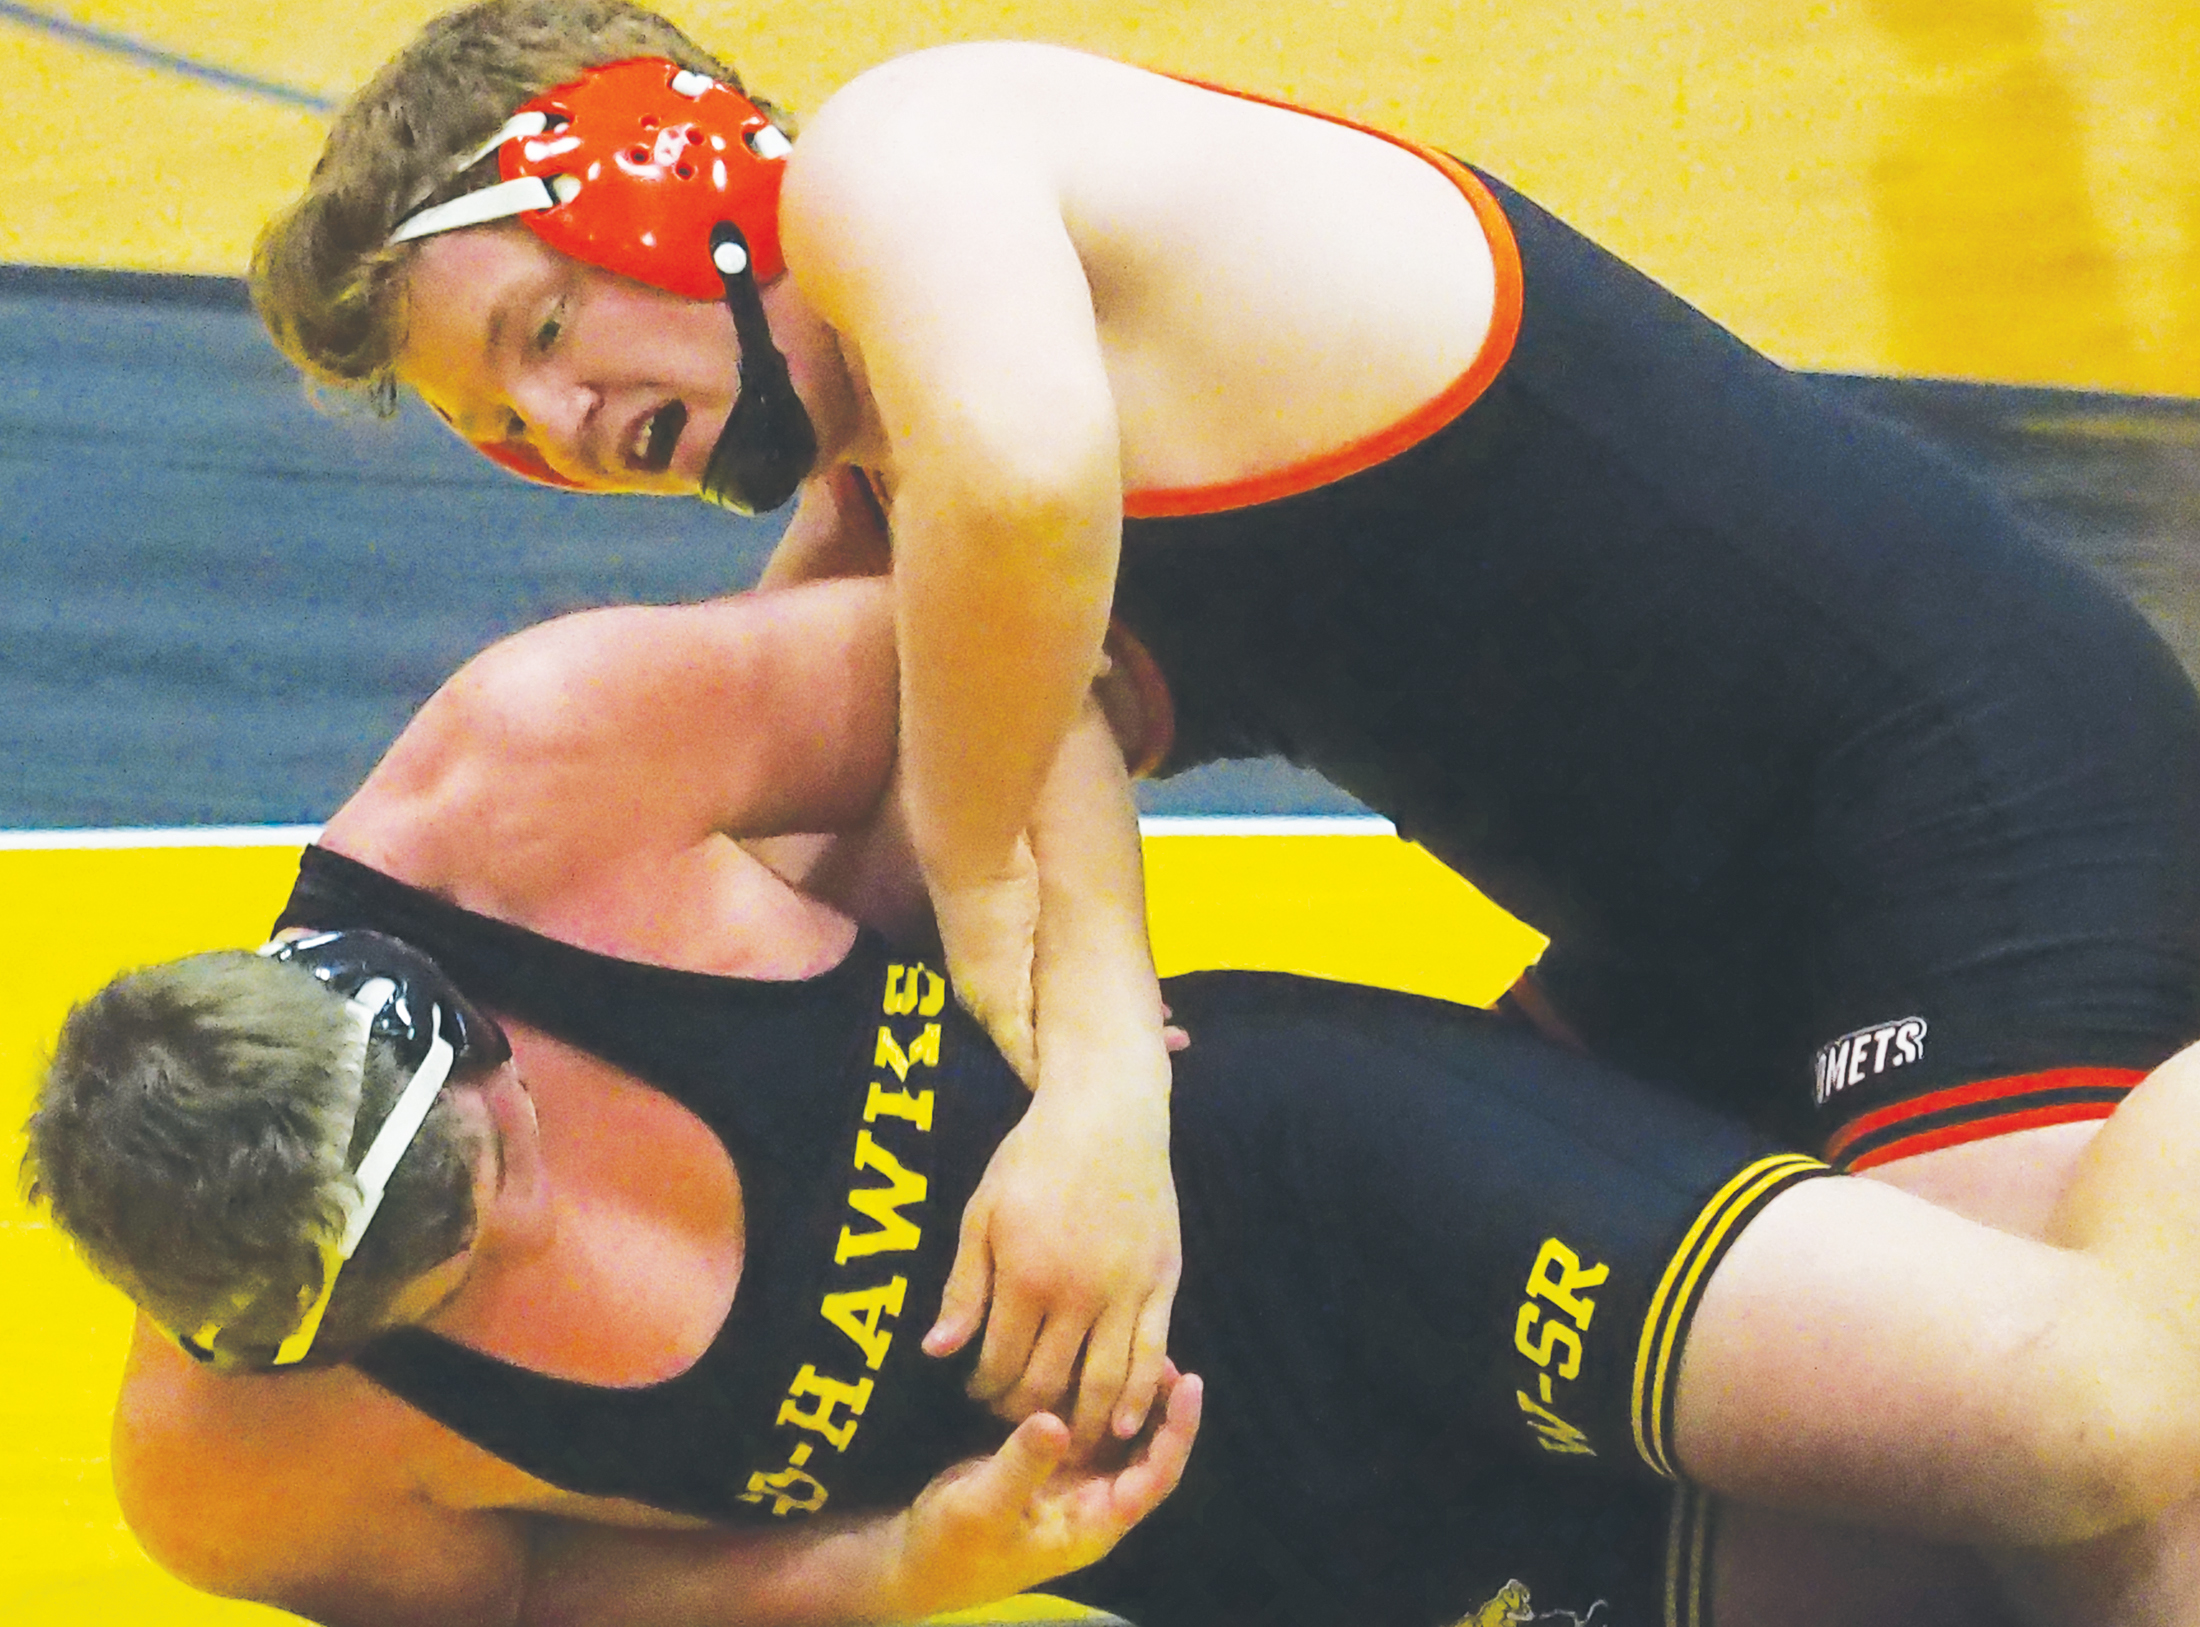 Go-Hawks defeat Comets in NEIC wrestling dual